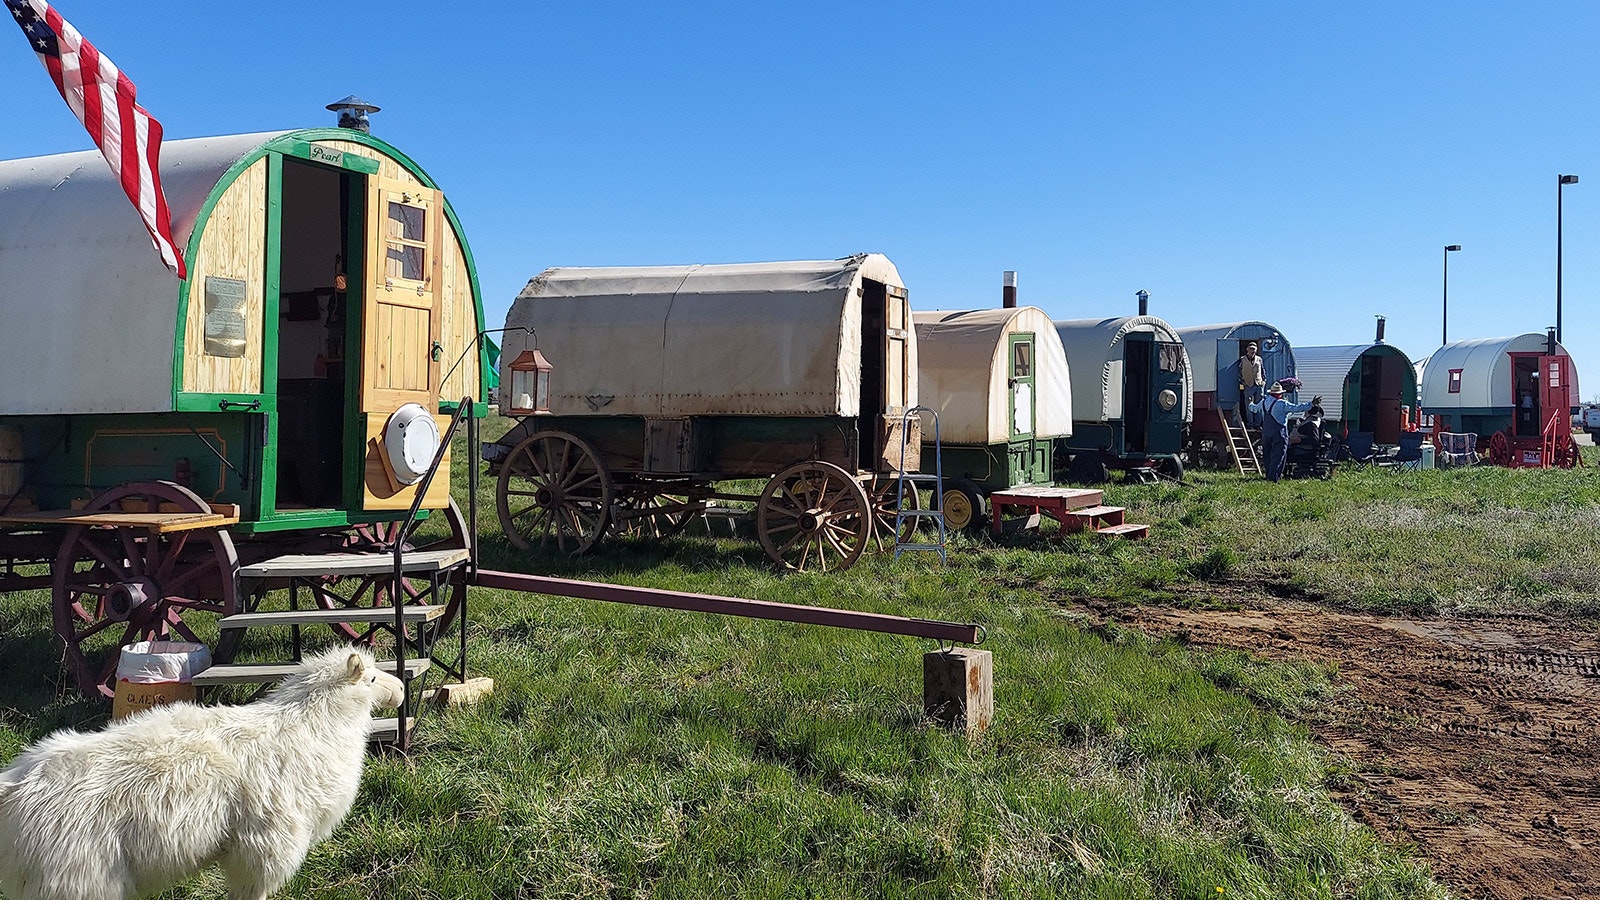 The sheep trail through Gillette was part of a larger festival celebrating the region's sheep ranching heritage, including a display of sheep wagons.